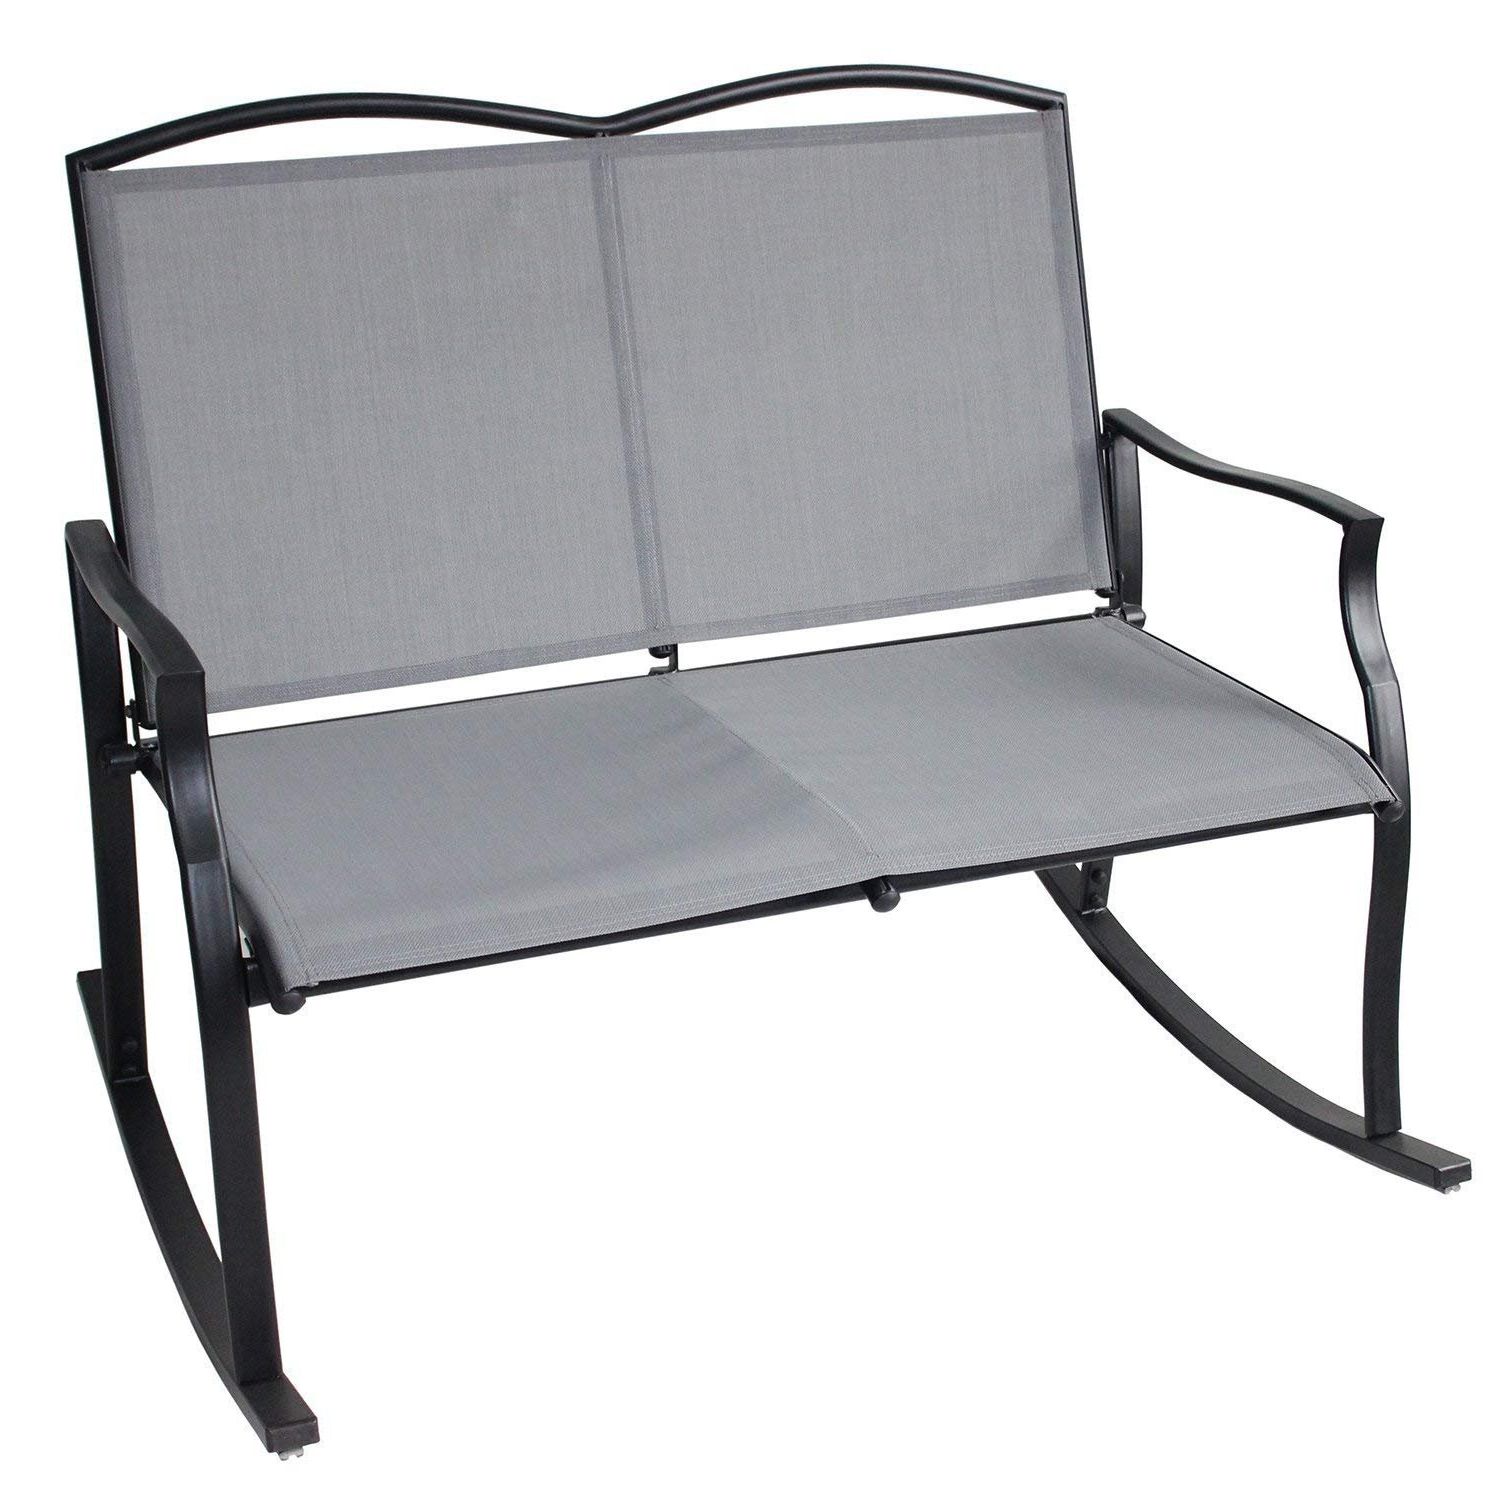 Unicoo – Patio Loveseat Bench, Garden Loveseat, Sling Rocking Chair, Glider  Swing Rocking Chair With Steel Frame For 2 Persons Pertaining To Widely Used Loveseat Glider Benches (View 3 of 30)